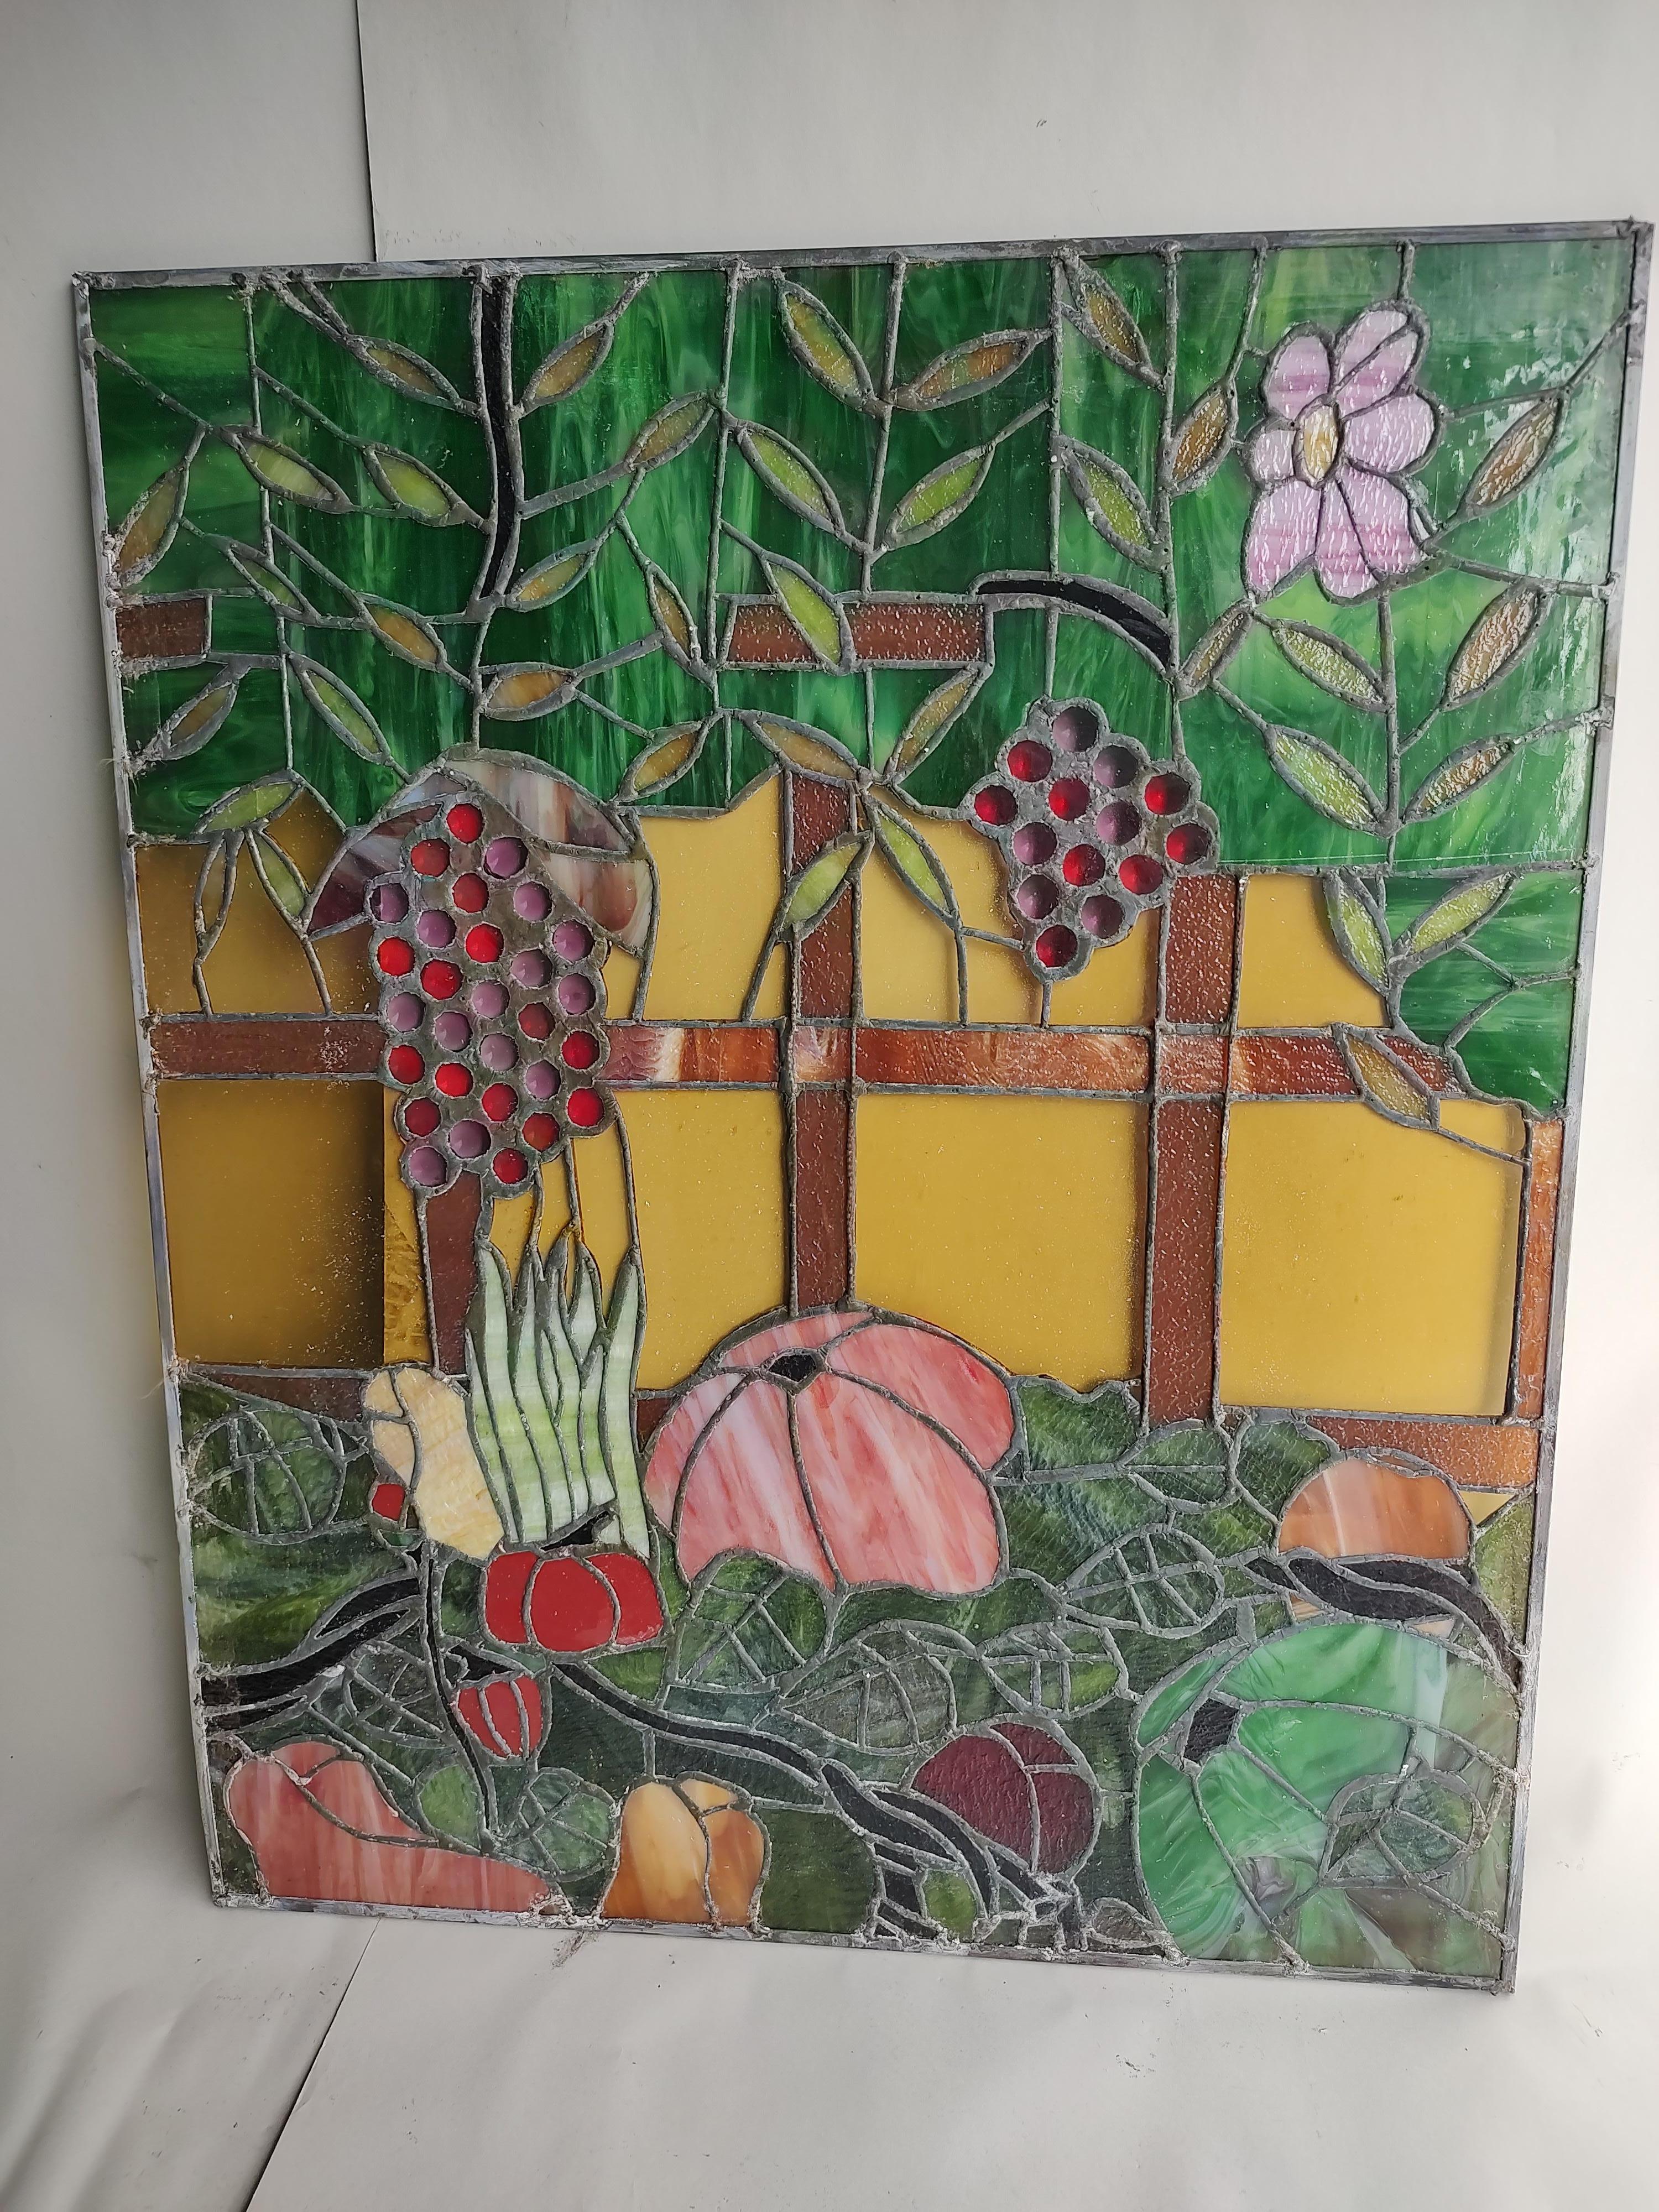 American Mid-Century Modern Stained Glass Window by Rainbow Studios NY, circa 1965 #6 For Sale